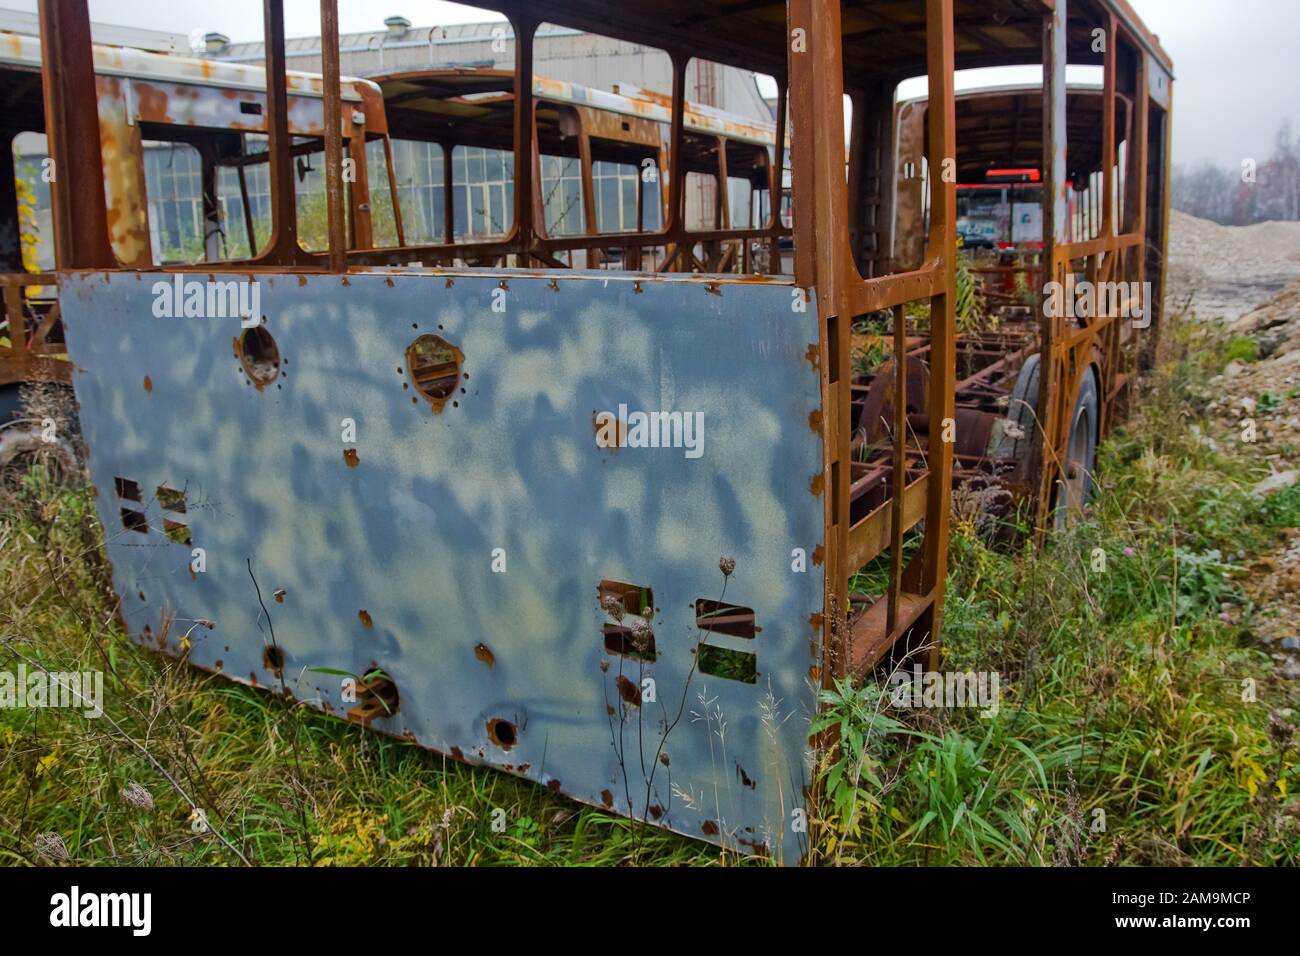 The wrecks of the buses standing on the vehicle cemetery. Waiting to be scrapped. Only rusty constructions sometimes remain. Stock Photo